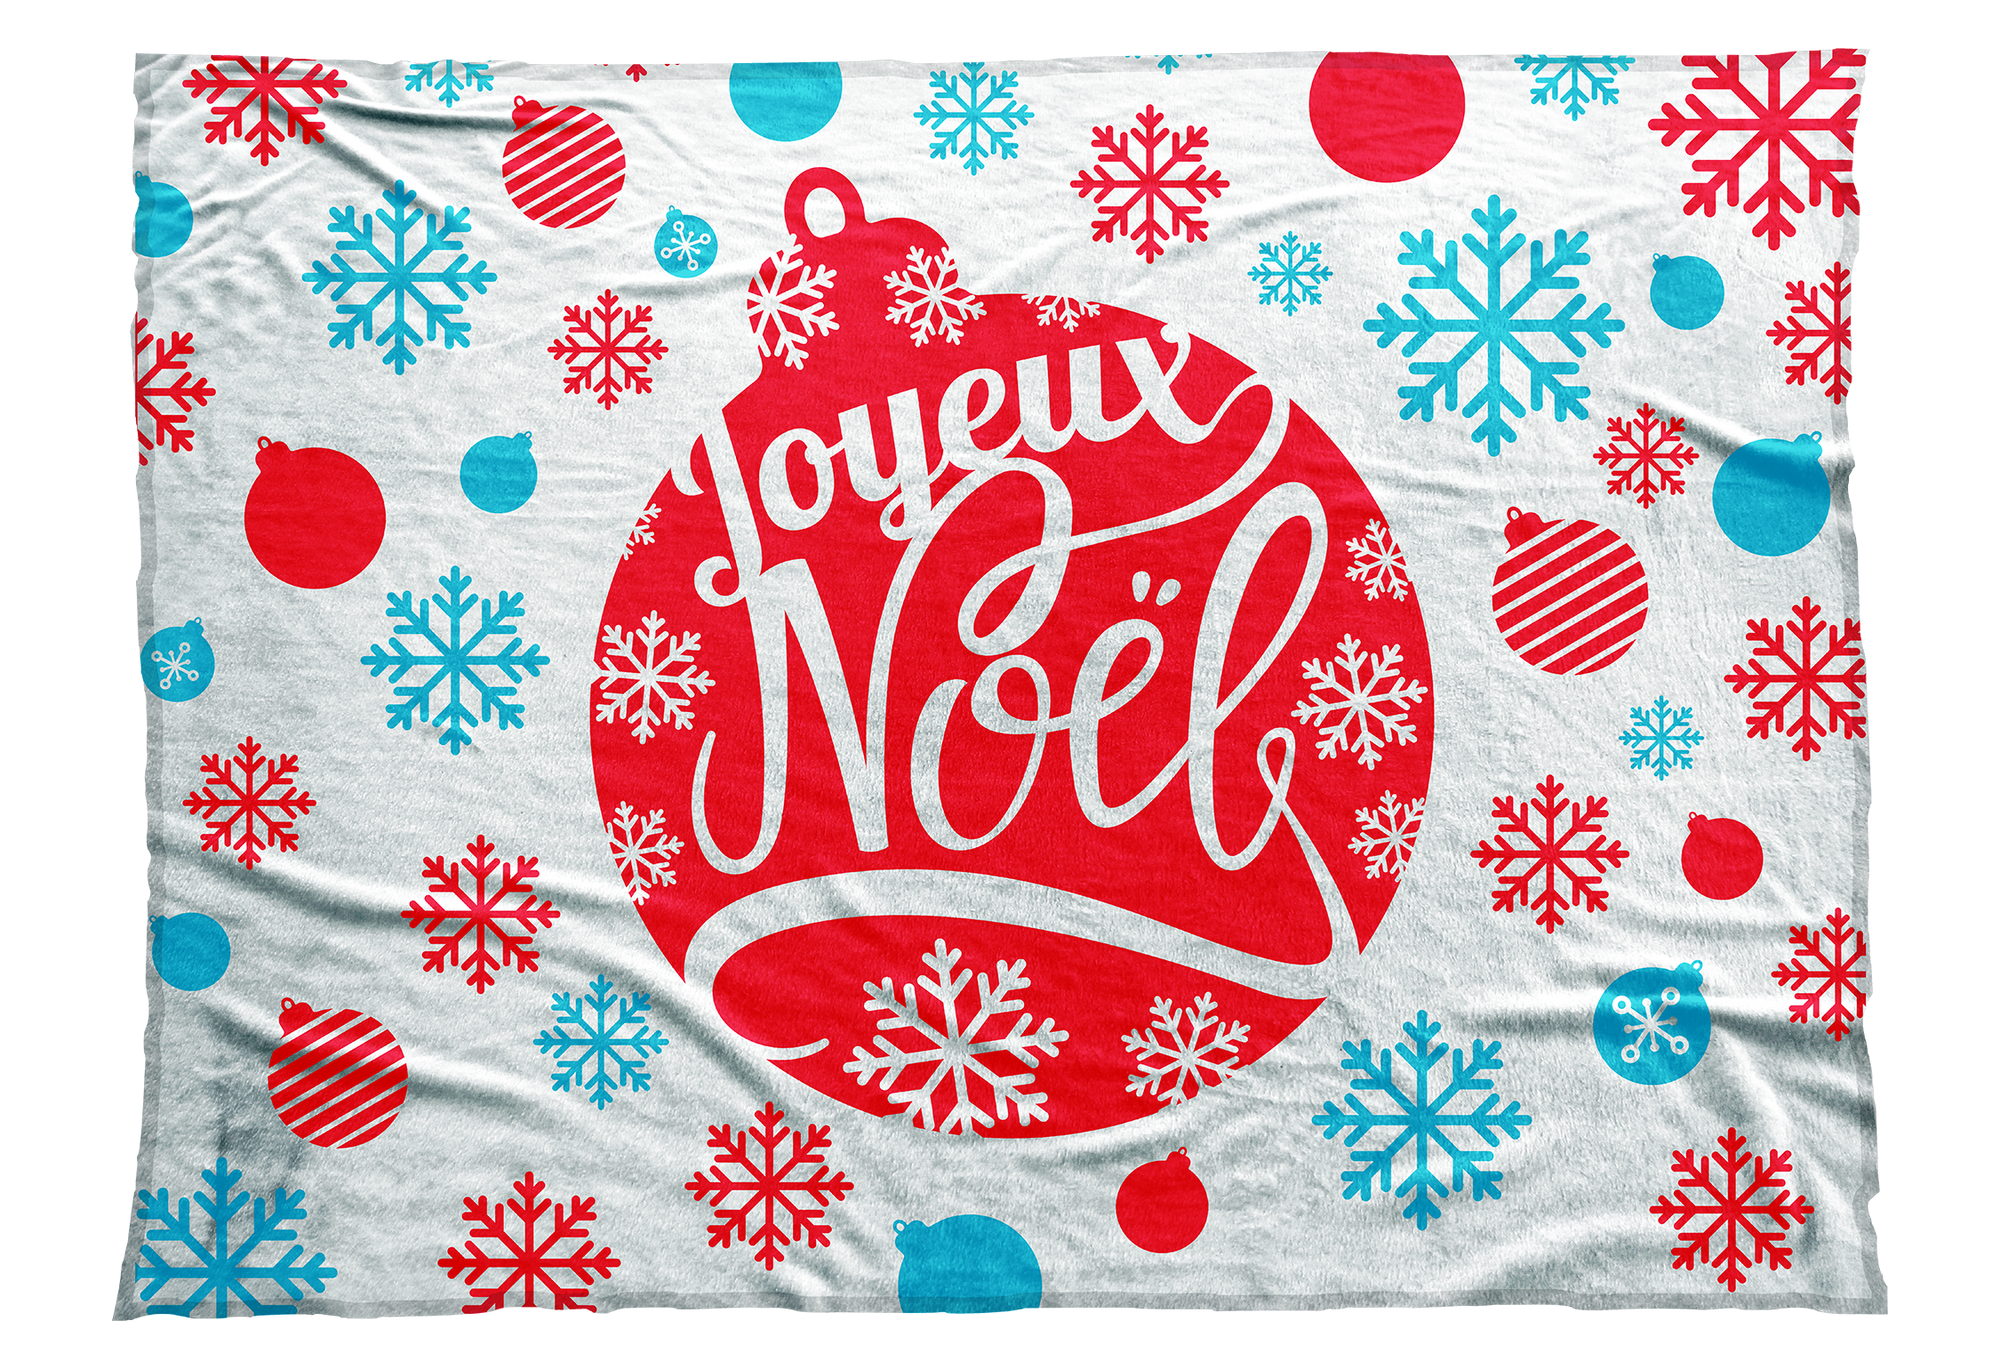 Whether you say Joyeux Noel or Merry Christmas this blanket can provide a festive seasonal accent with its red and blue design. Cuddle up in one with a mug of warm apple cider this Christmas season. Available in two additional color palettes. 